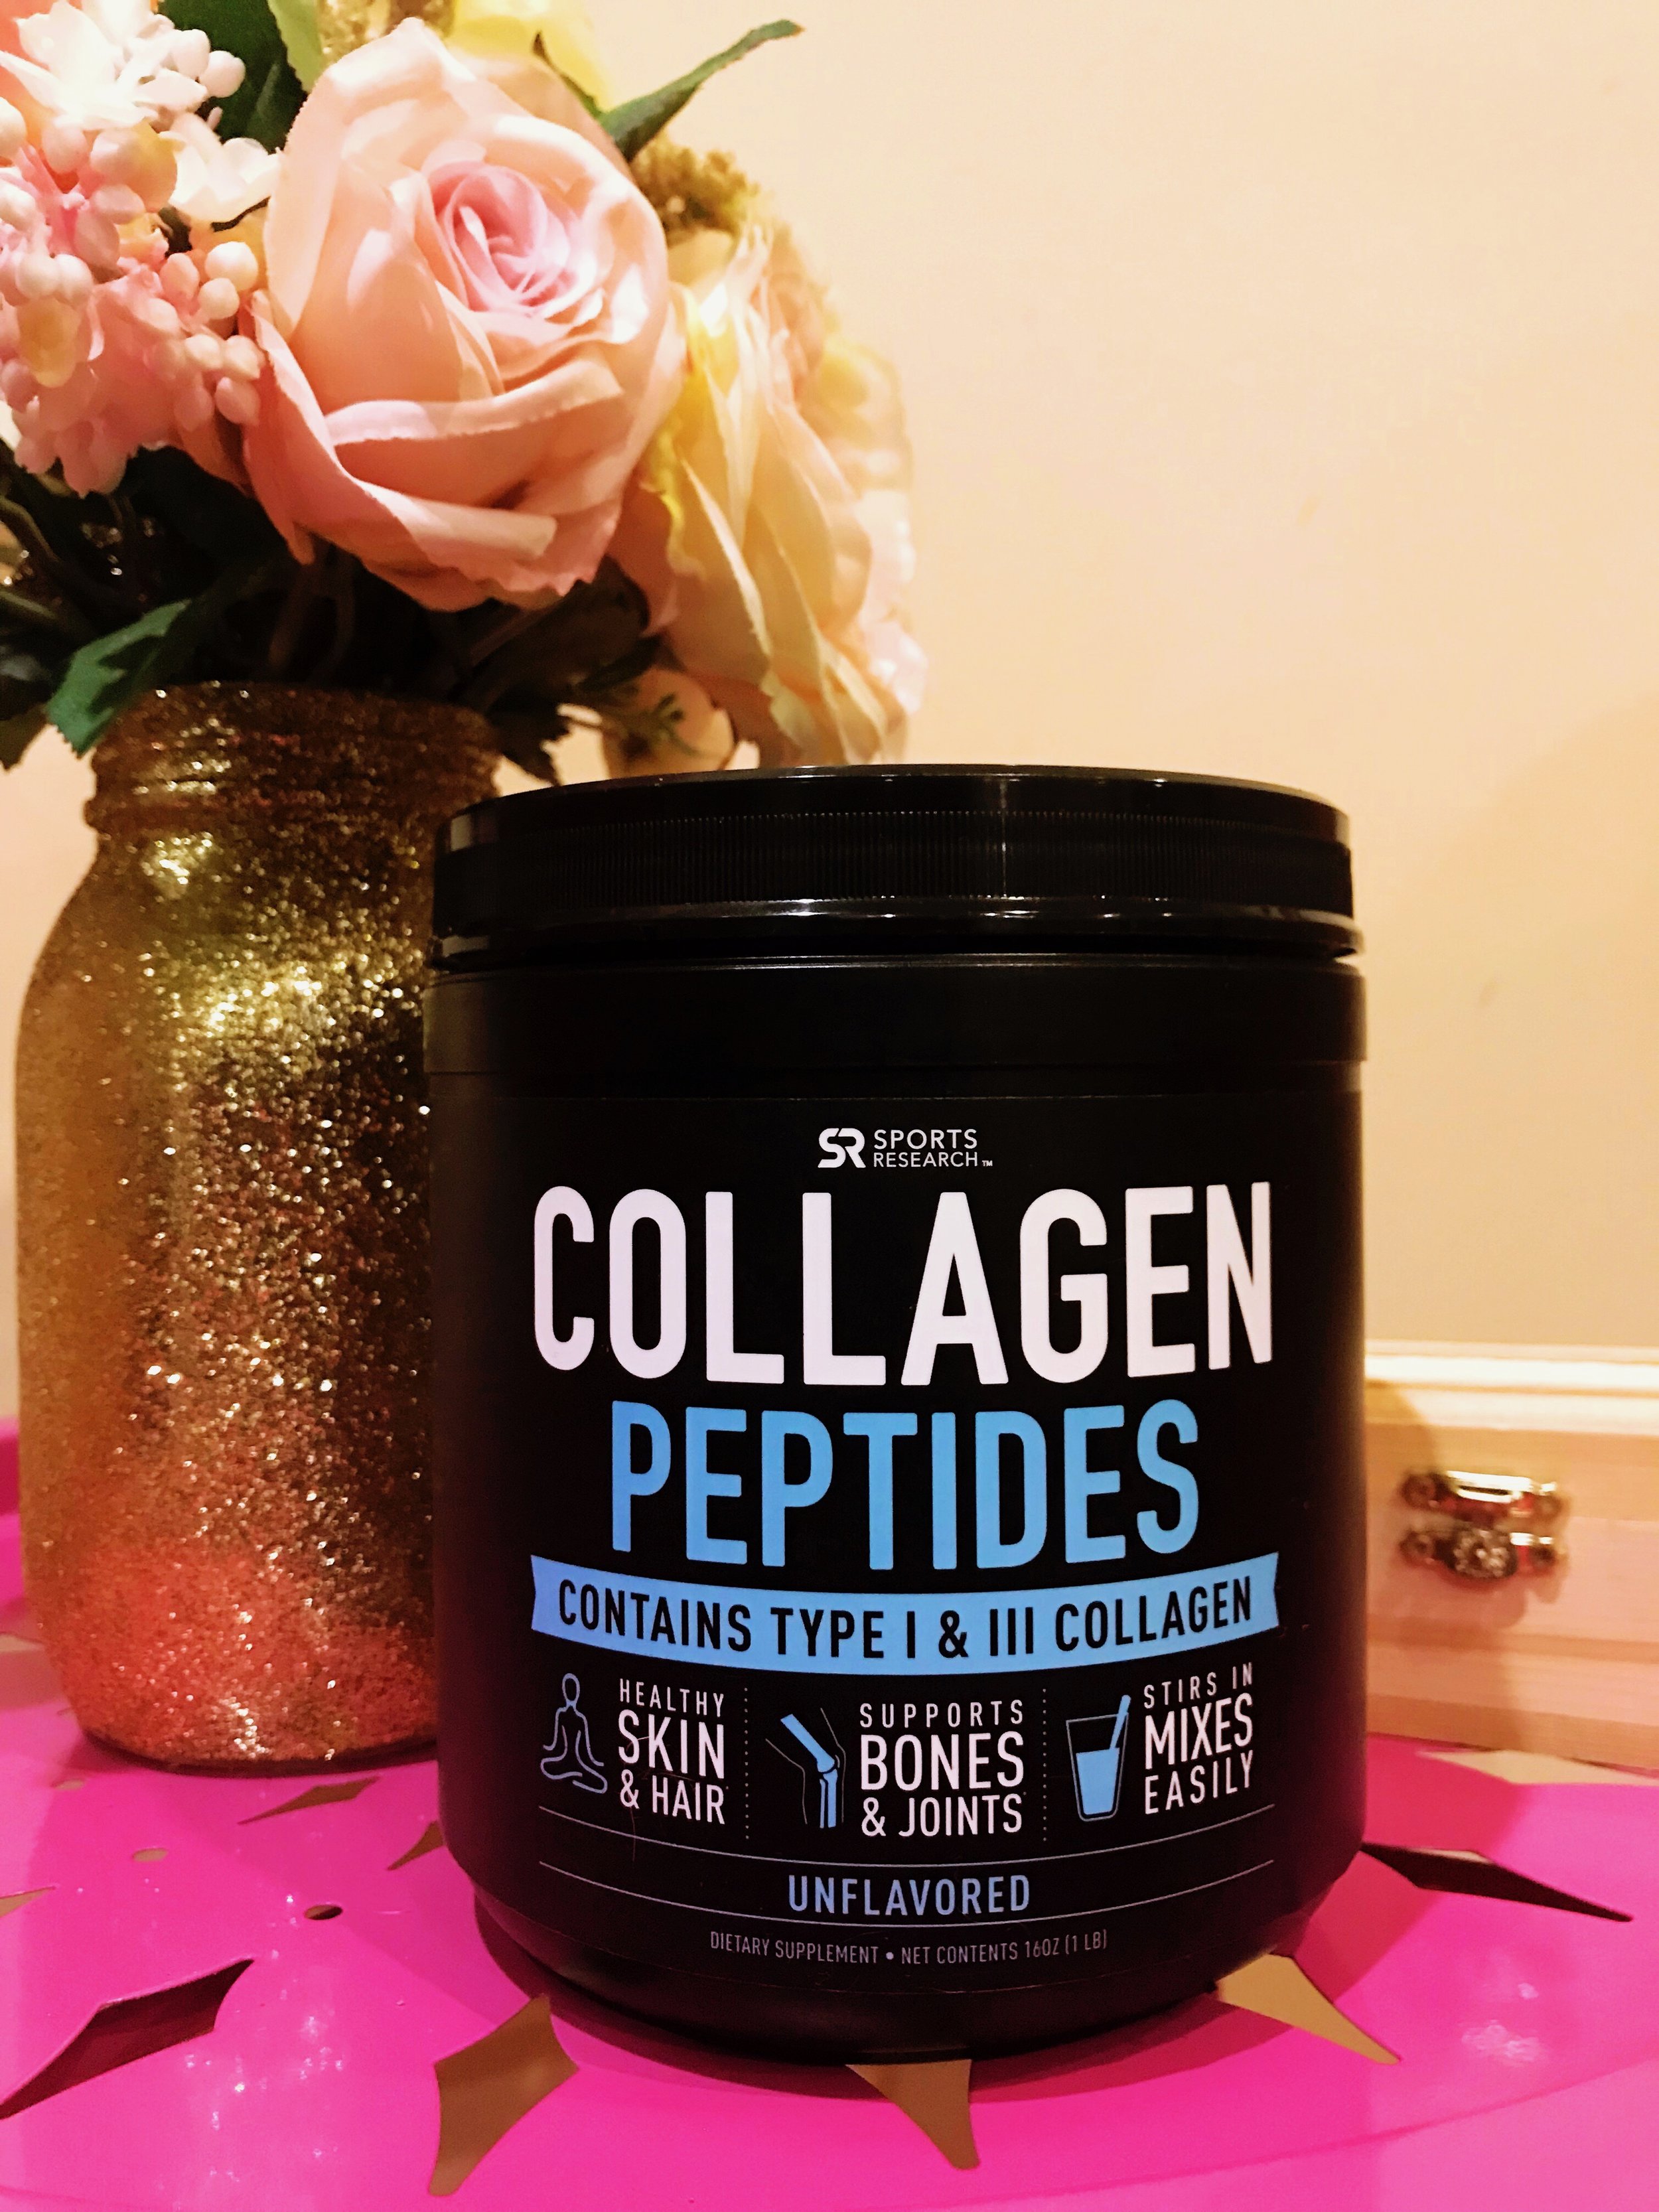 A tub of Collagen Peptides